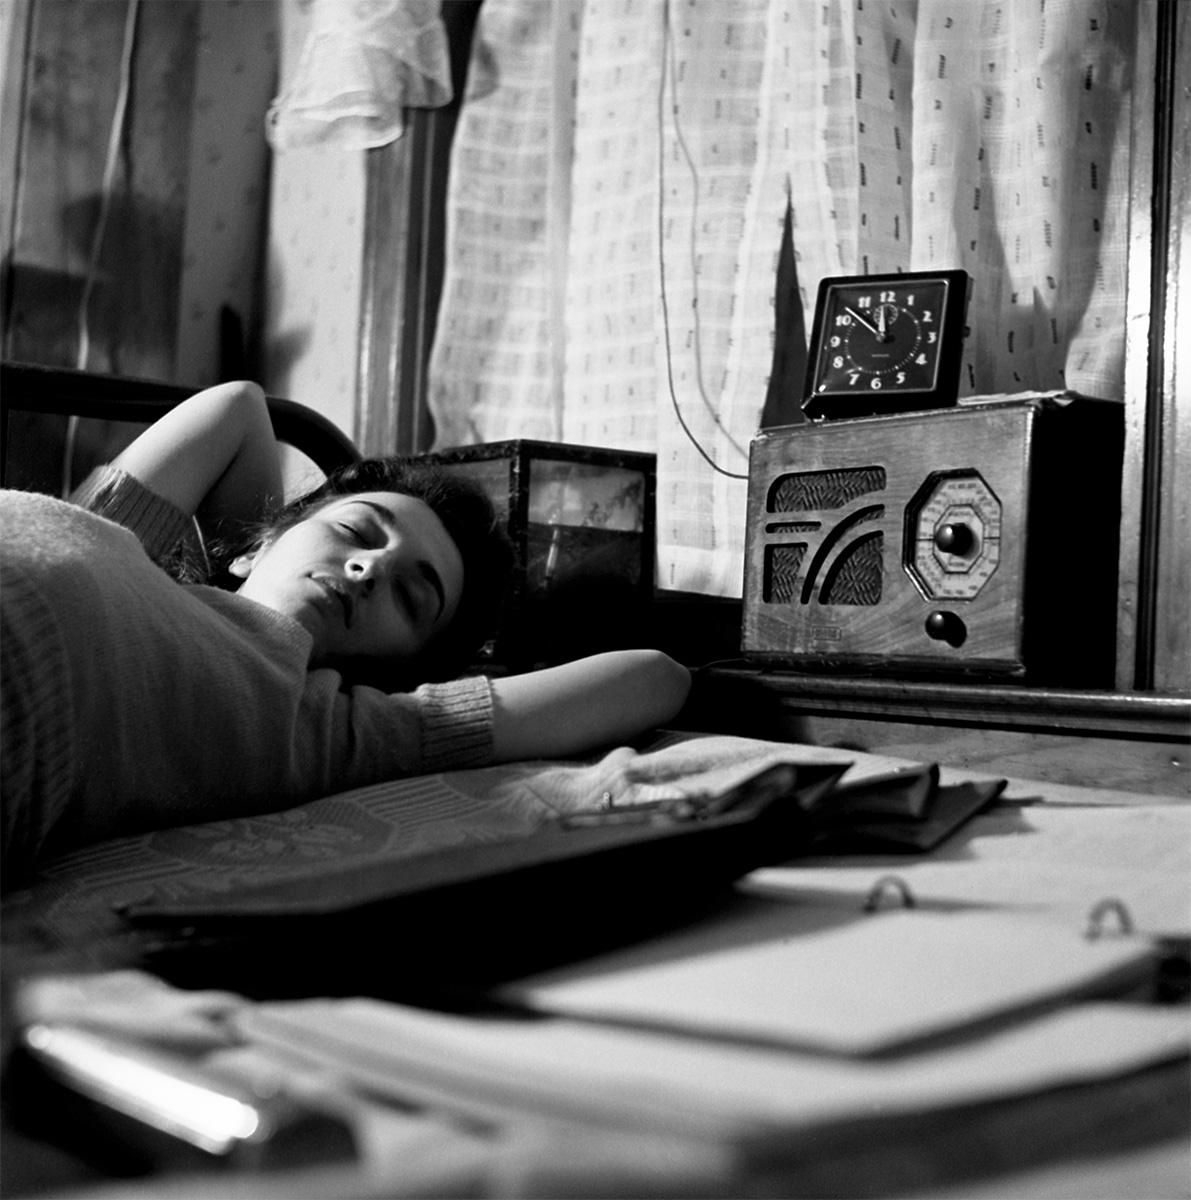 Photo of a female lying on a bed, listening to the radio. Caption: ”Washington, D.C. A radio is company for this girl in her boardinghouse room.”, Jan<p>© Esther Bubley</p>